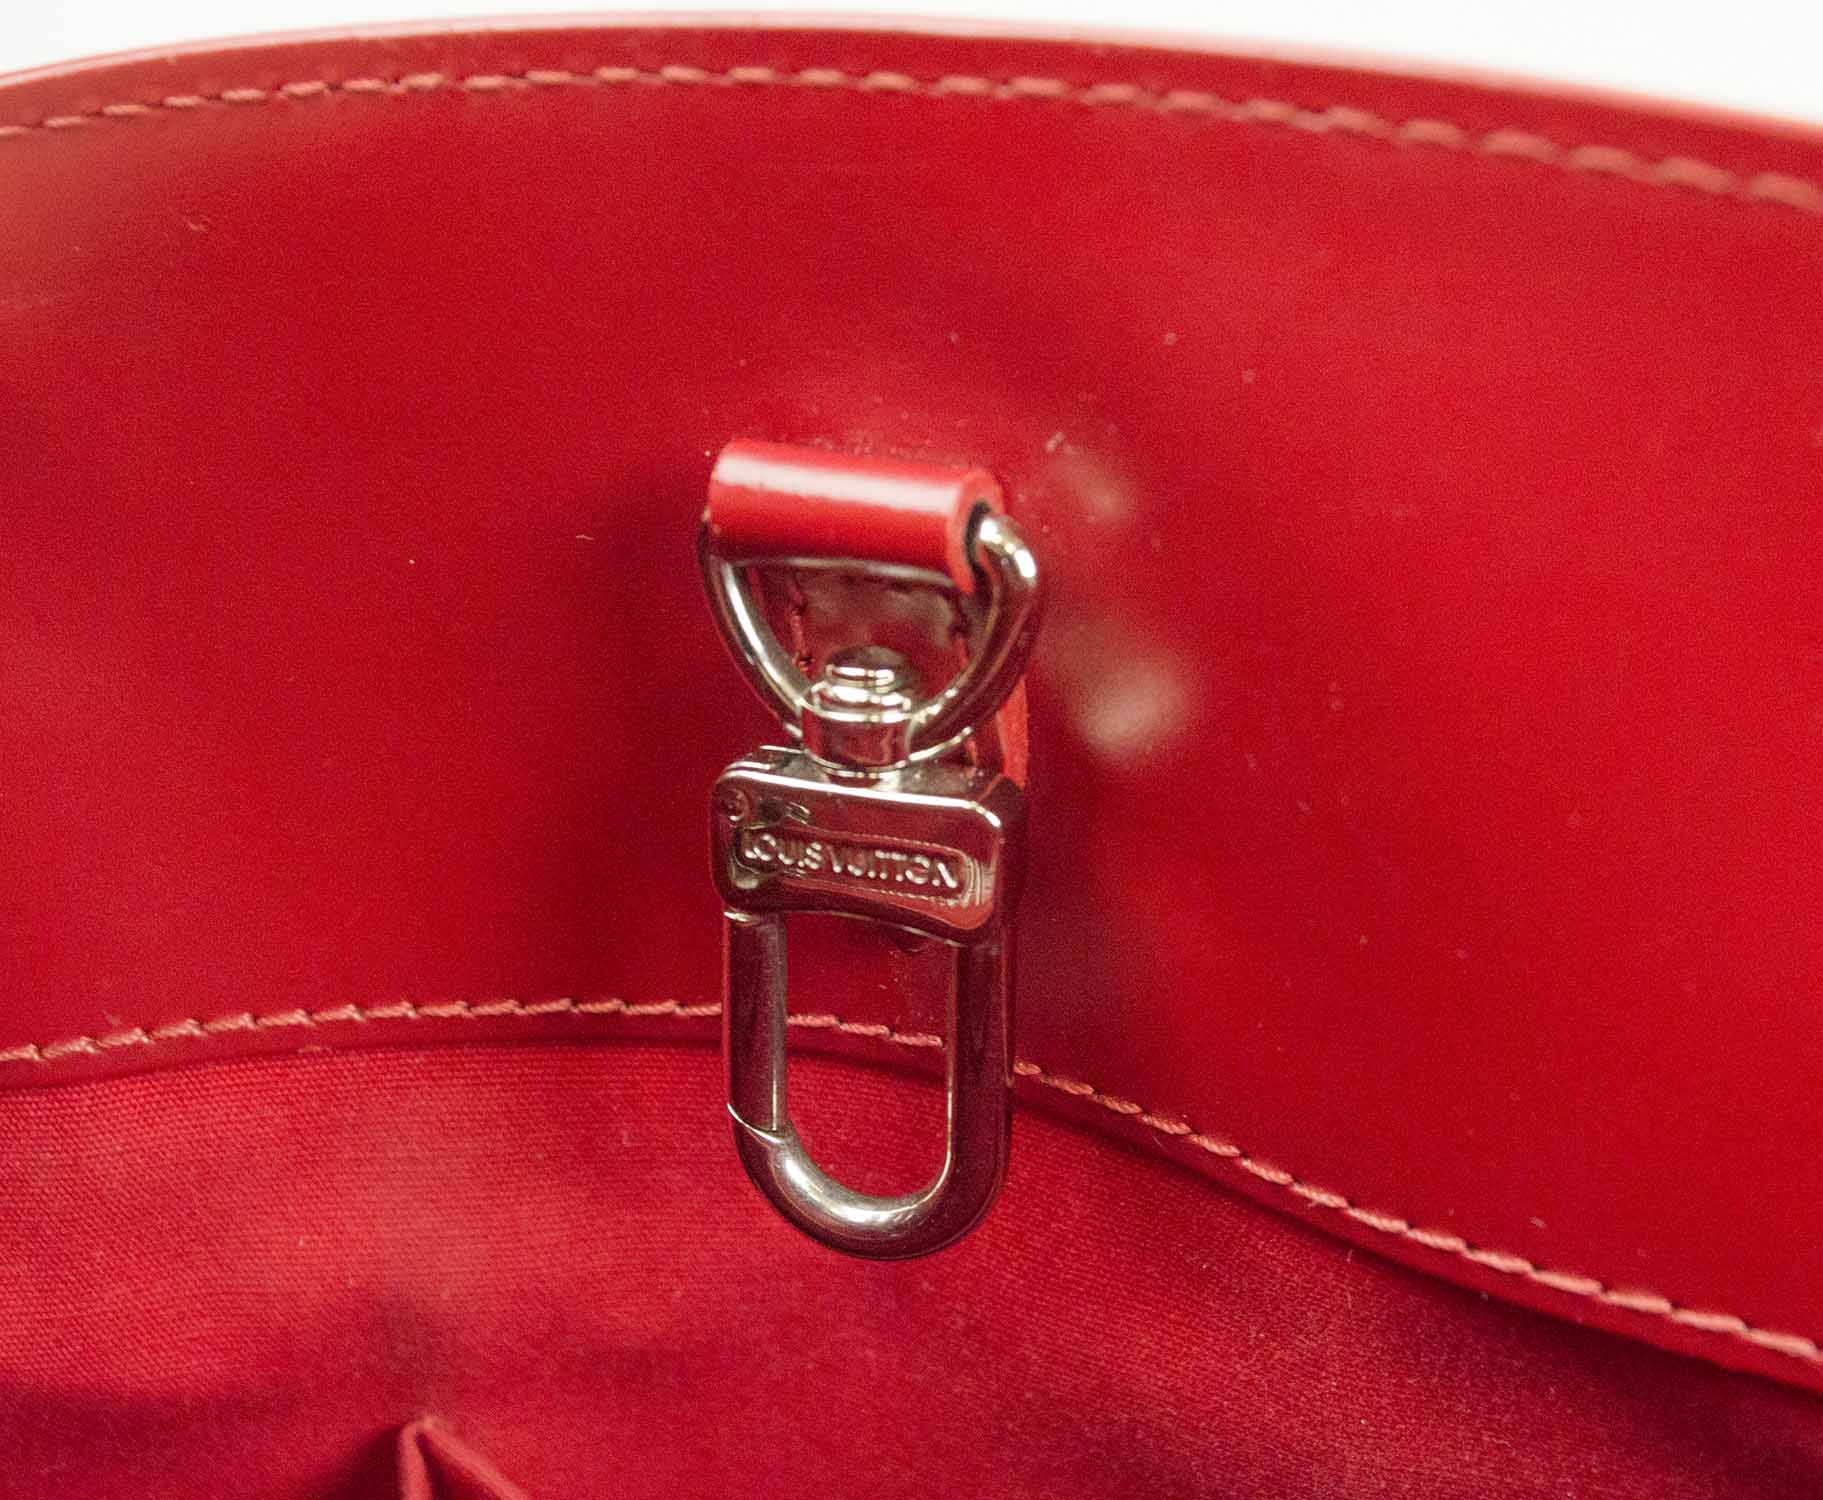 Sold at Auction: A LOUIS VUITTON RED PATENT LEATHER ZIPPER BAG